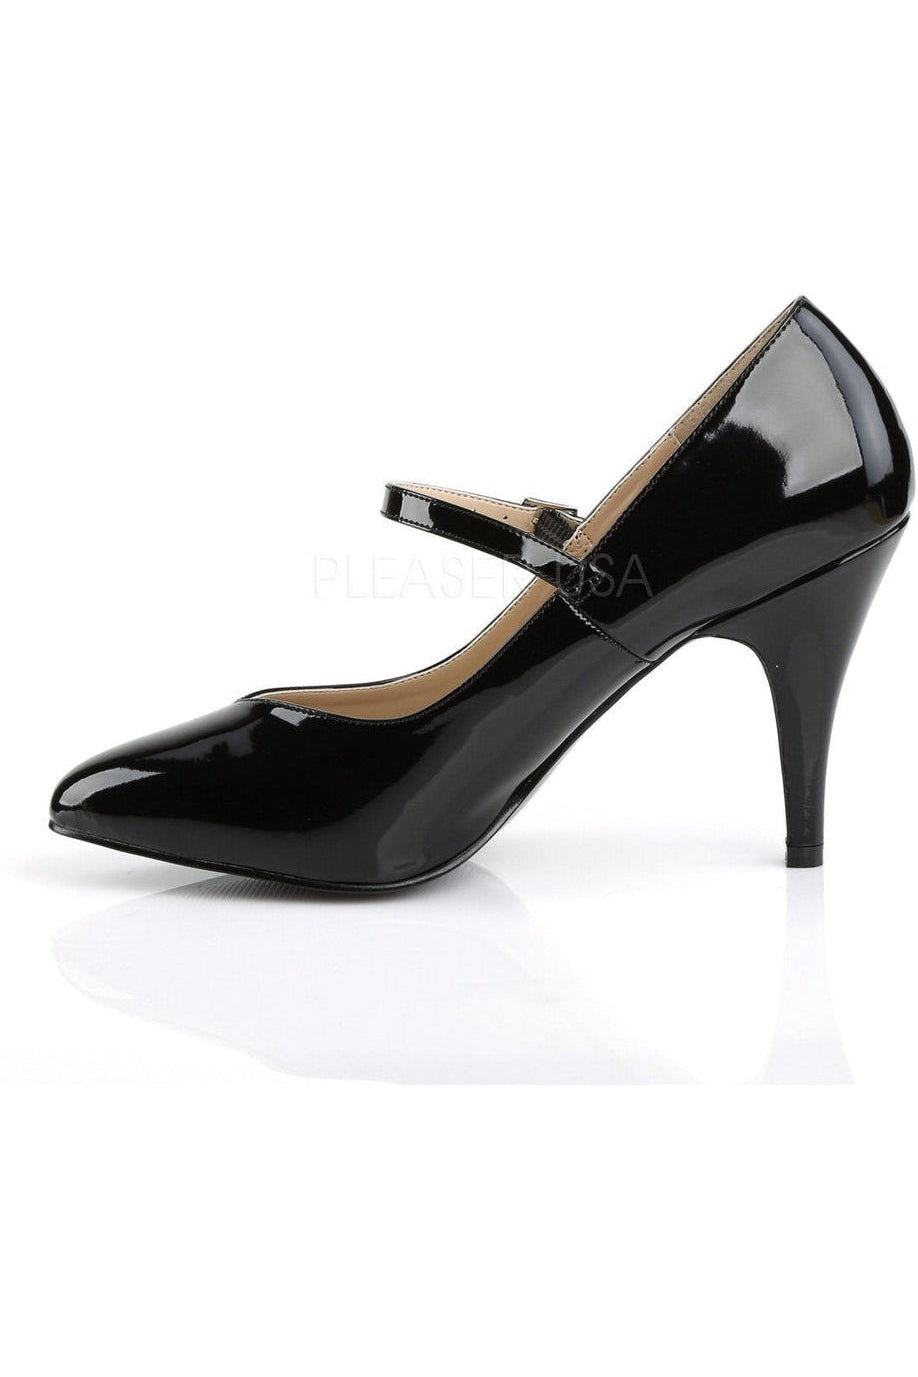 DREAM-428 Pump | Black Patent-Pleaser Pink Label-Mary Janes-SEXYSHOES.COM